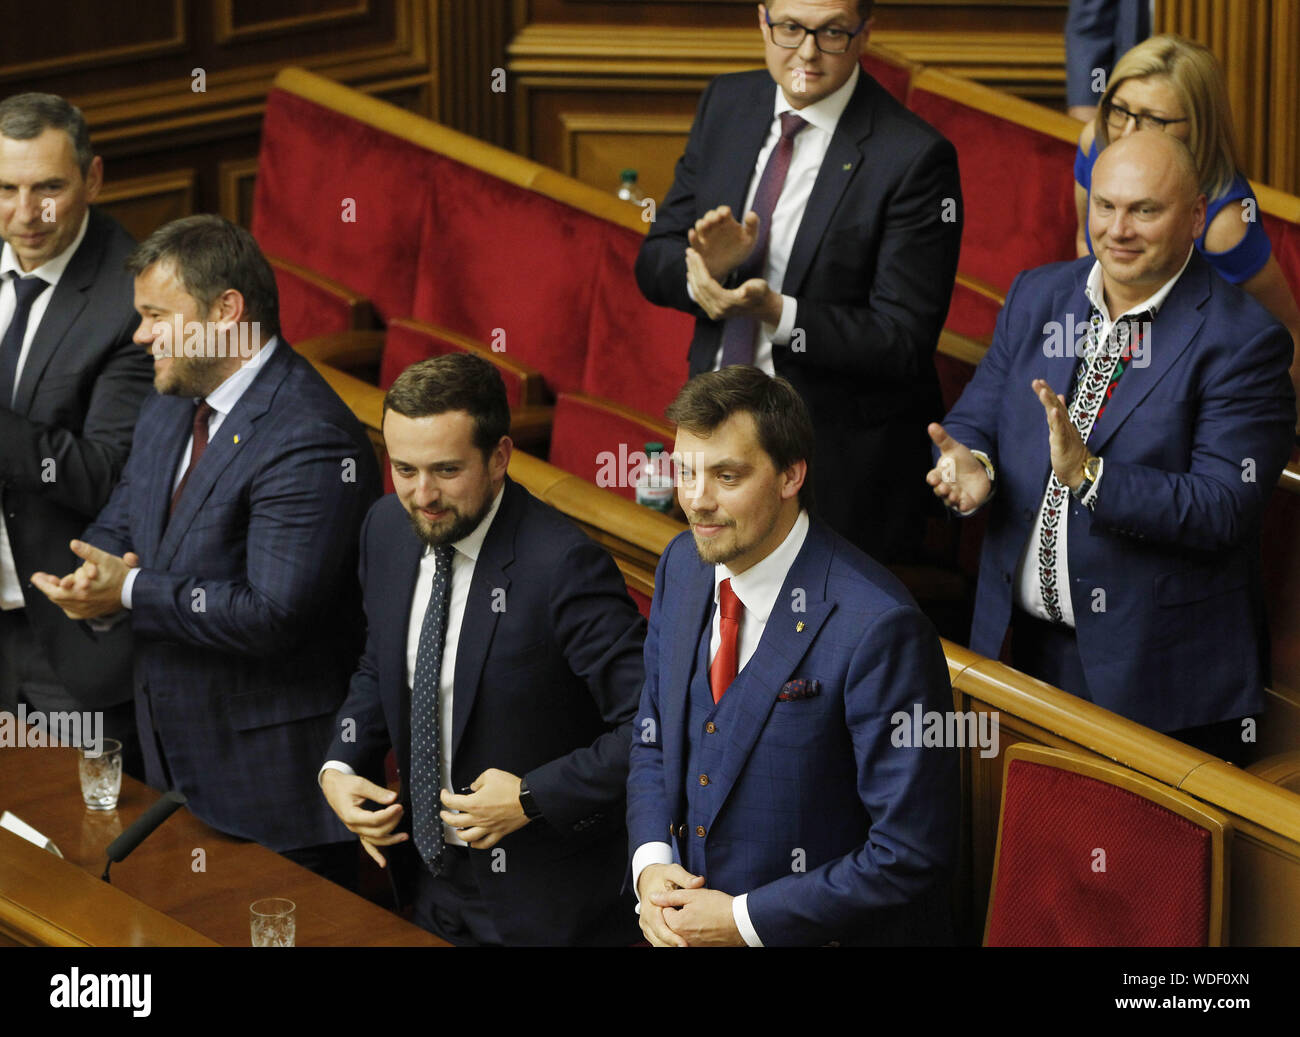 Kiev, Ukraine. 29th Aug, 2019. Presidential Office's members congratulates newly elected Ukrainian Prime Minister OLEKSIY GONCHARUK (C) during a session of the Ukrainian Parliament in Kiev, Ukraine, 29 August 2019. The Ukrainian Parliament voted to appoint Oleksiy Goncharuk as Prime Minister of Ukraine. Th''‹e first parliamentary session following the July extraordinary Parliament's elections in the country took place in Kiev. Credit: Serg Glovny/ZUMA Wire/Alamy Live News Stock Photo